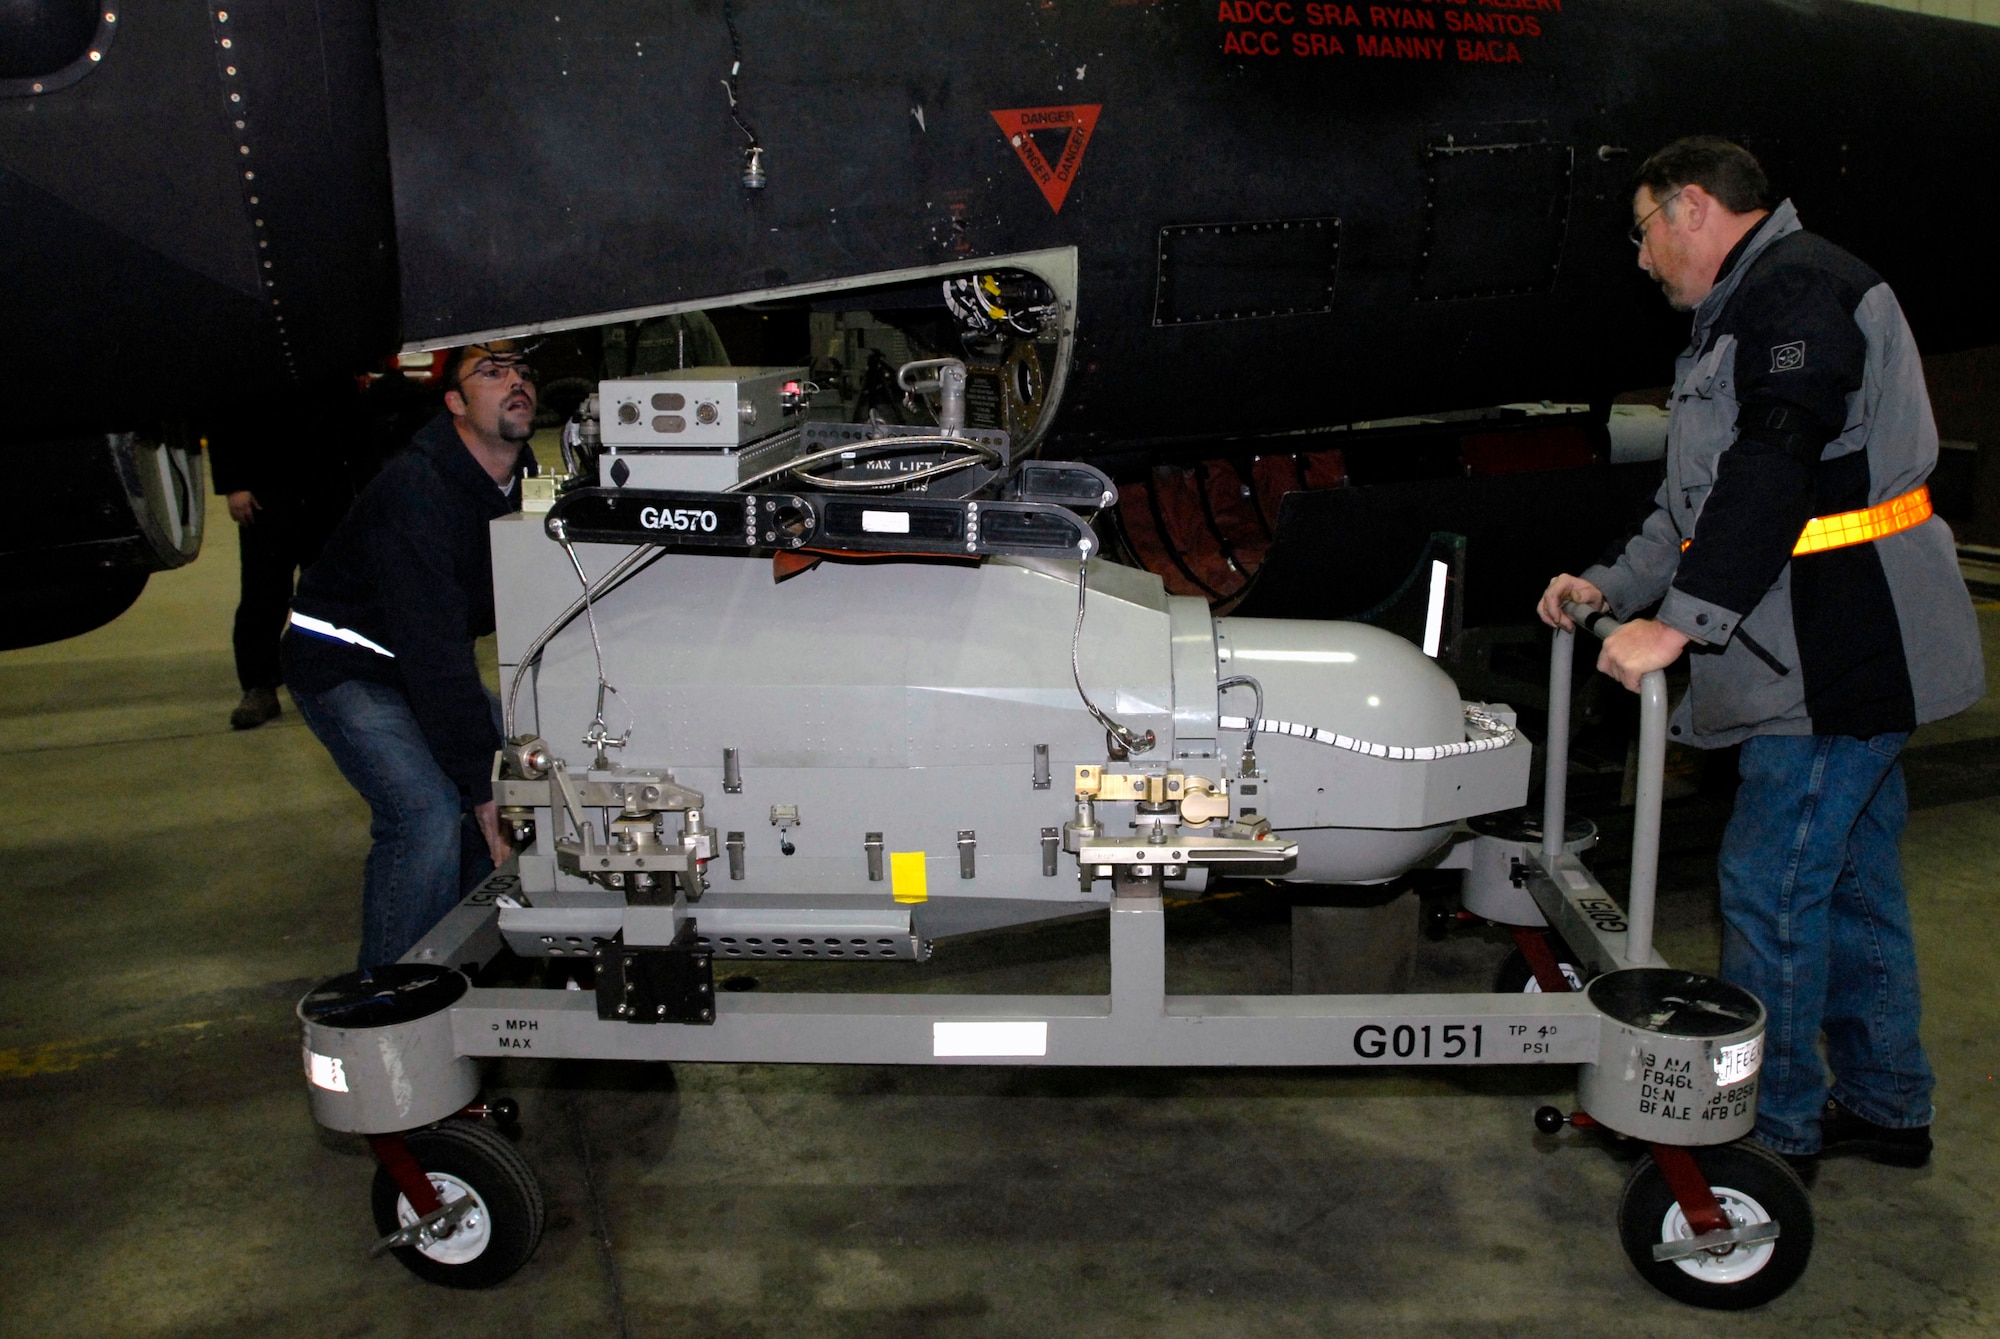 Ron Deagle, left, and Rod Blazvick, both of Goodrich ISR Division, prepare to load an Optical Bar Camera into a U-2 aircraft March 13 at Osan Air Base, Republic of Korea. The U-2 was being prepared for a humanitarian mission to capture imagery of the earthquake- and tsunami-affected areas of Japan. (U.S. Air Force photo by Senior Master Sgt. Paul Holcomb)